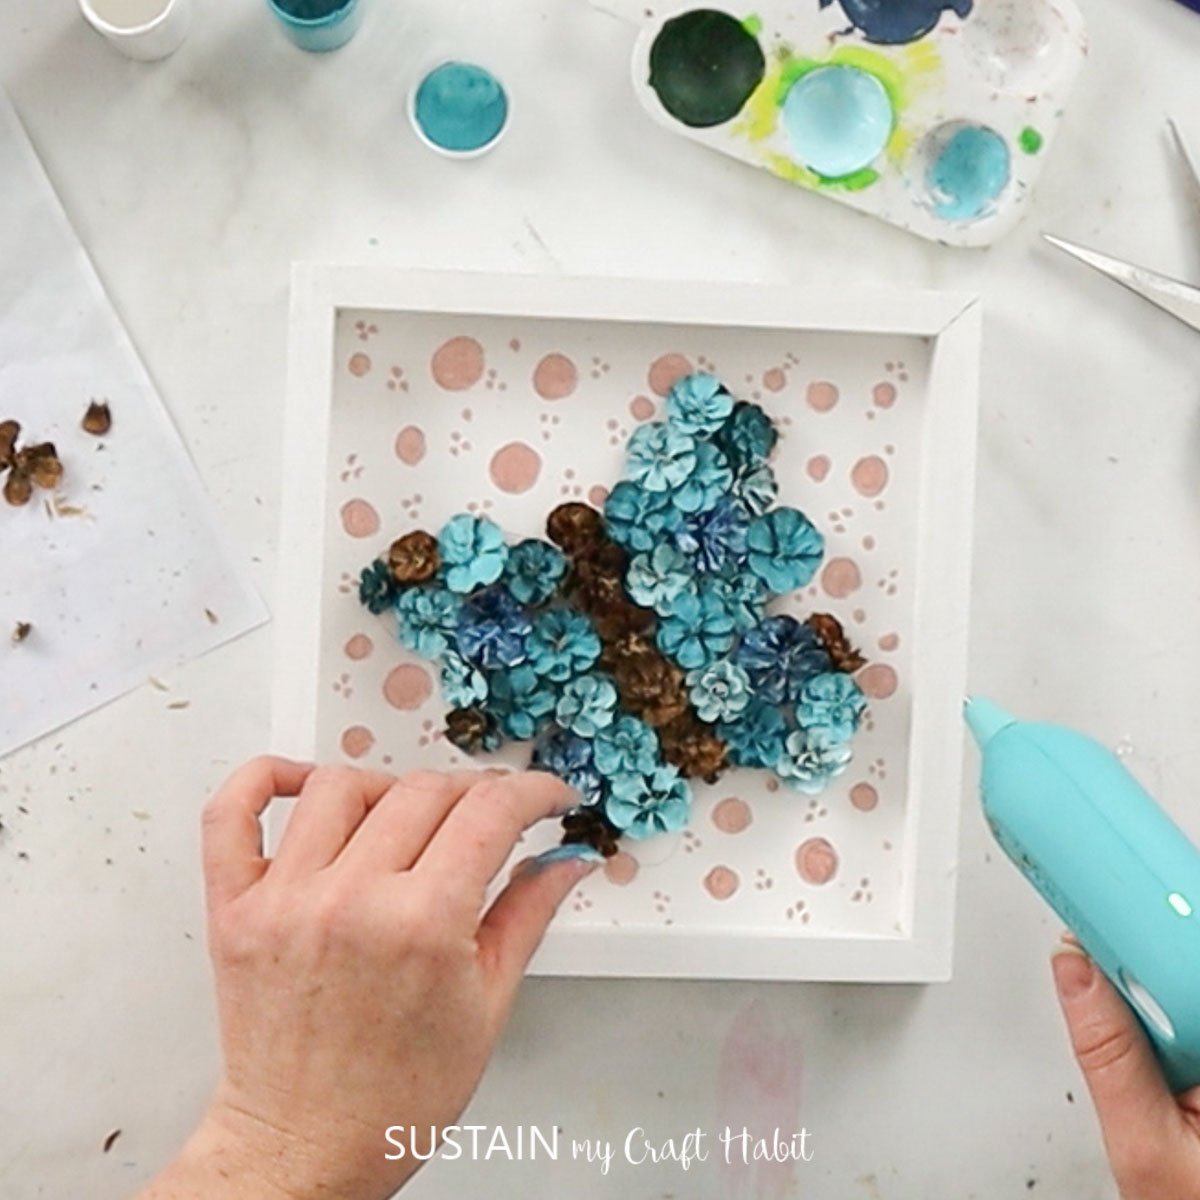 Hot gluing pinecones to the wood canvas.